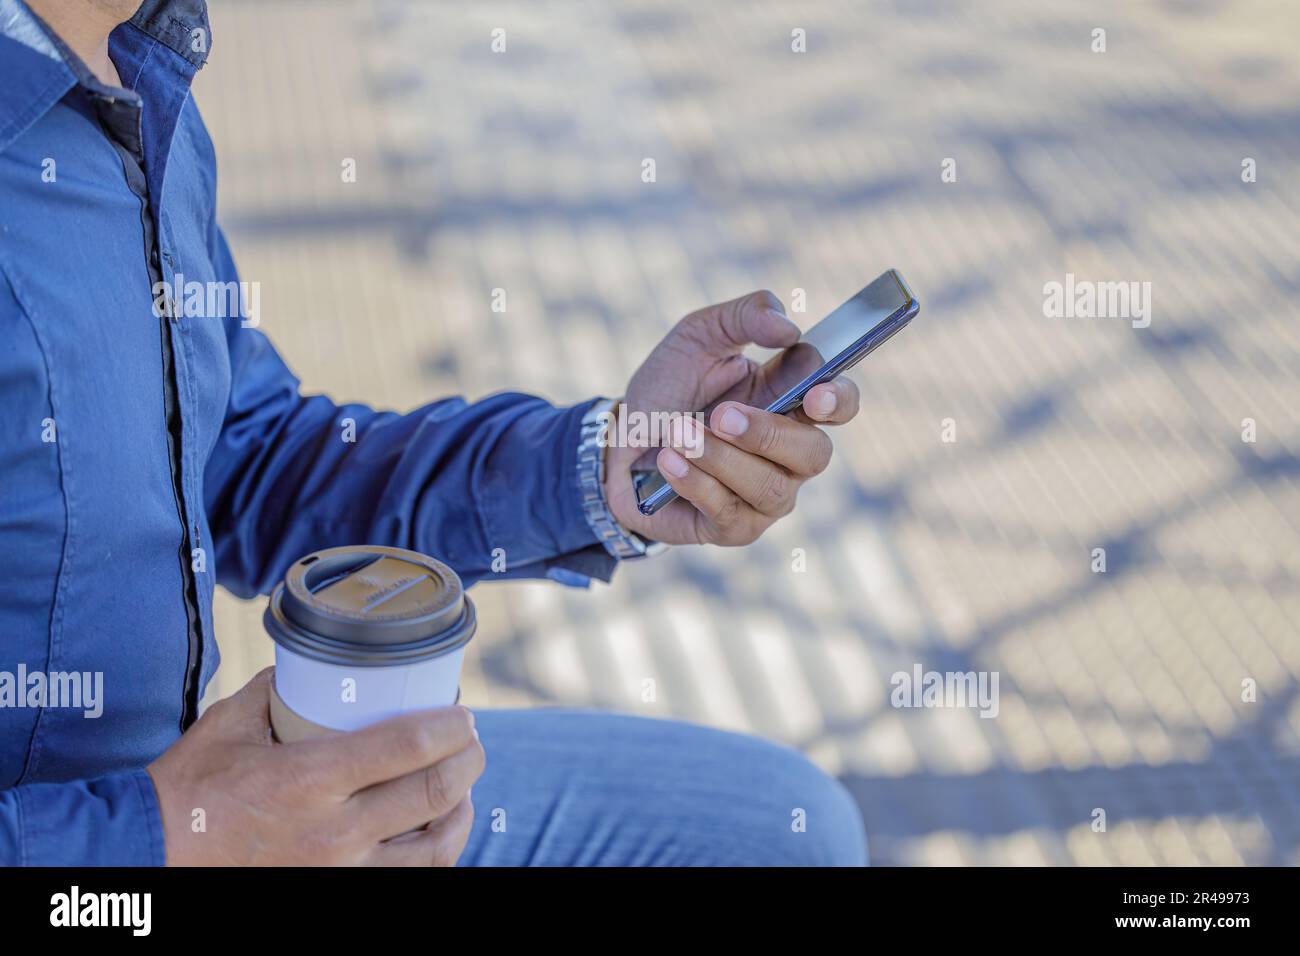 Detail of the hands of a man with a mobile phone and a paper cup of coffee. Stock Photo